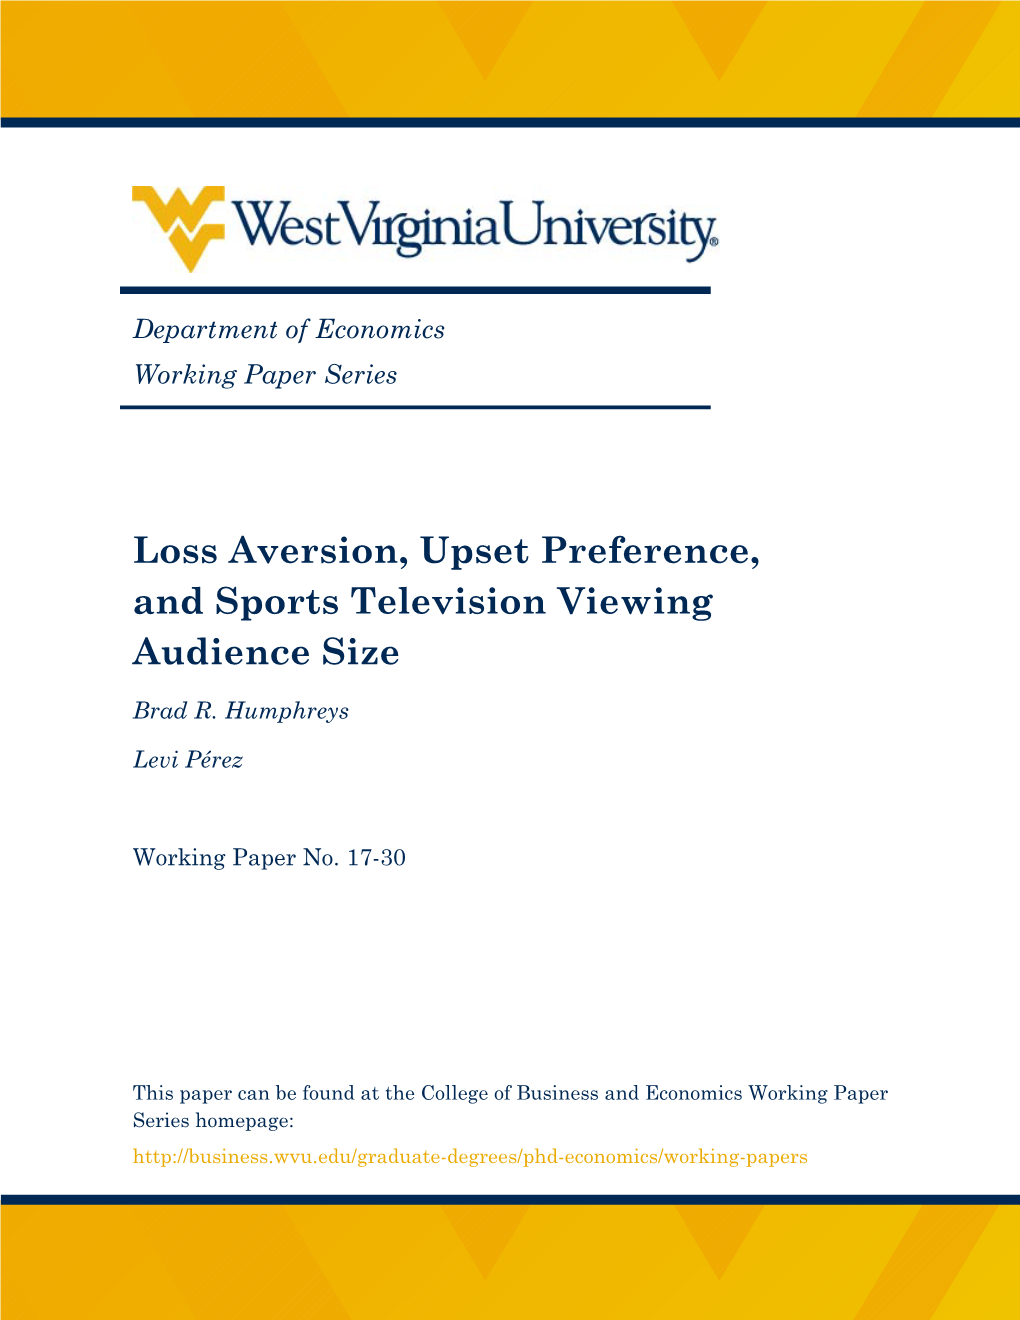 Loss Aversion, Upset Preference, and Sports Television Viewing Audience Size